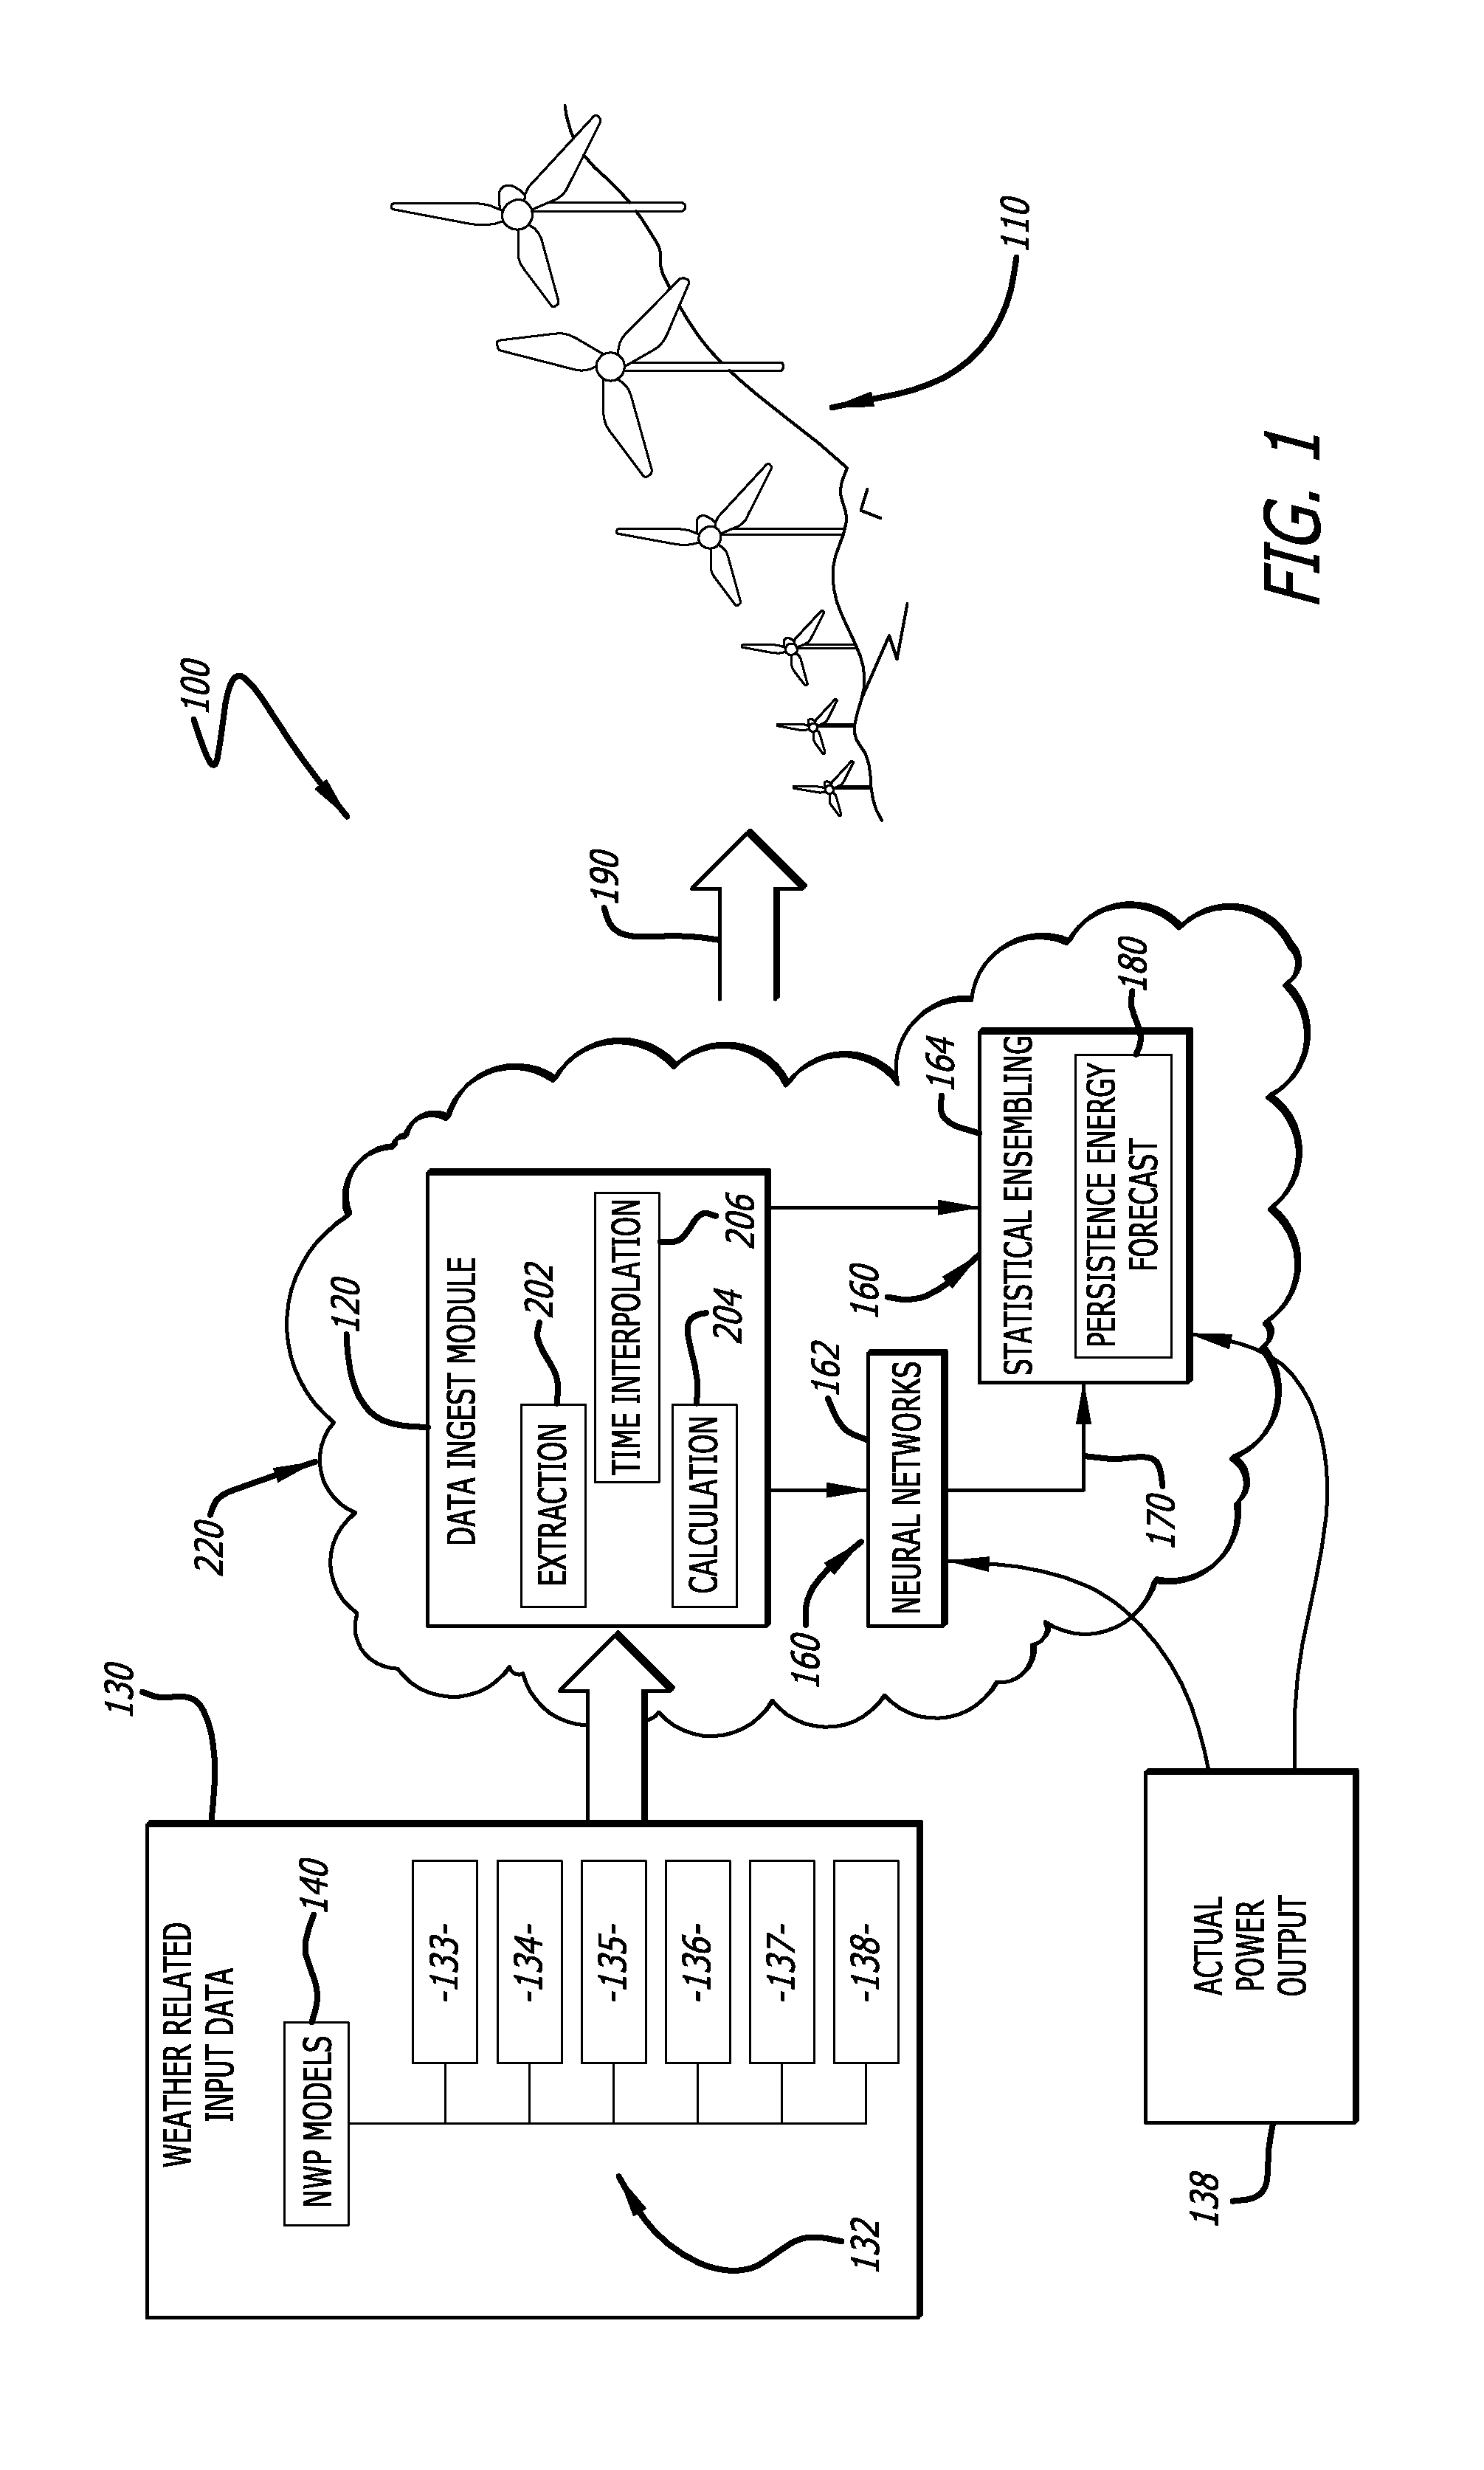 Application of artificial intelligence techniques and statistical ensembling to forecast power output of a wind energy facility